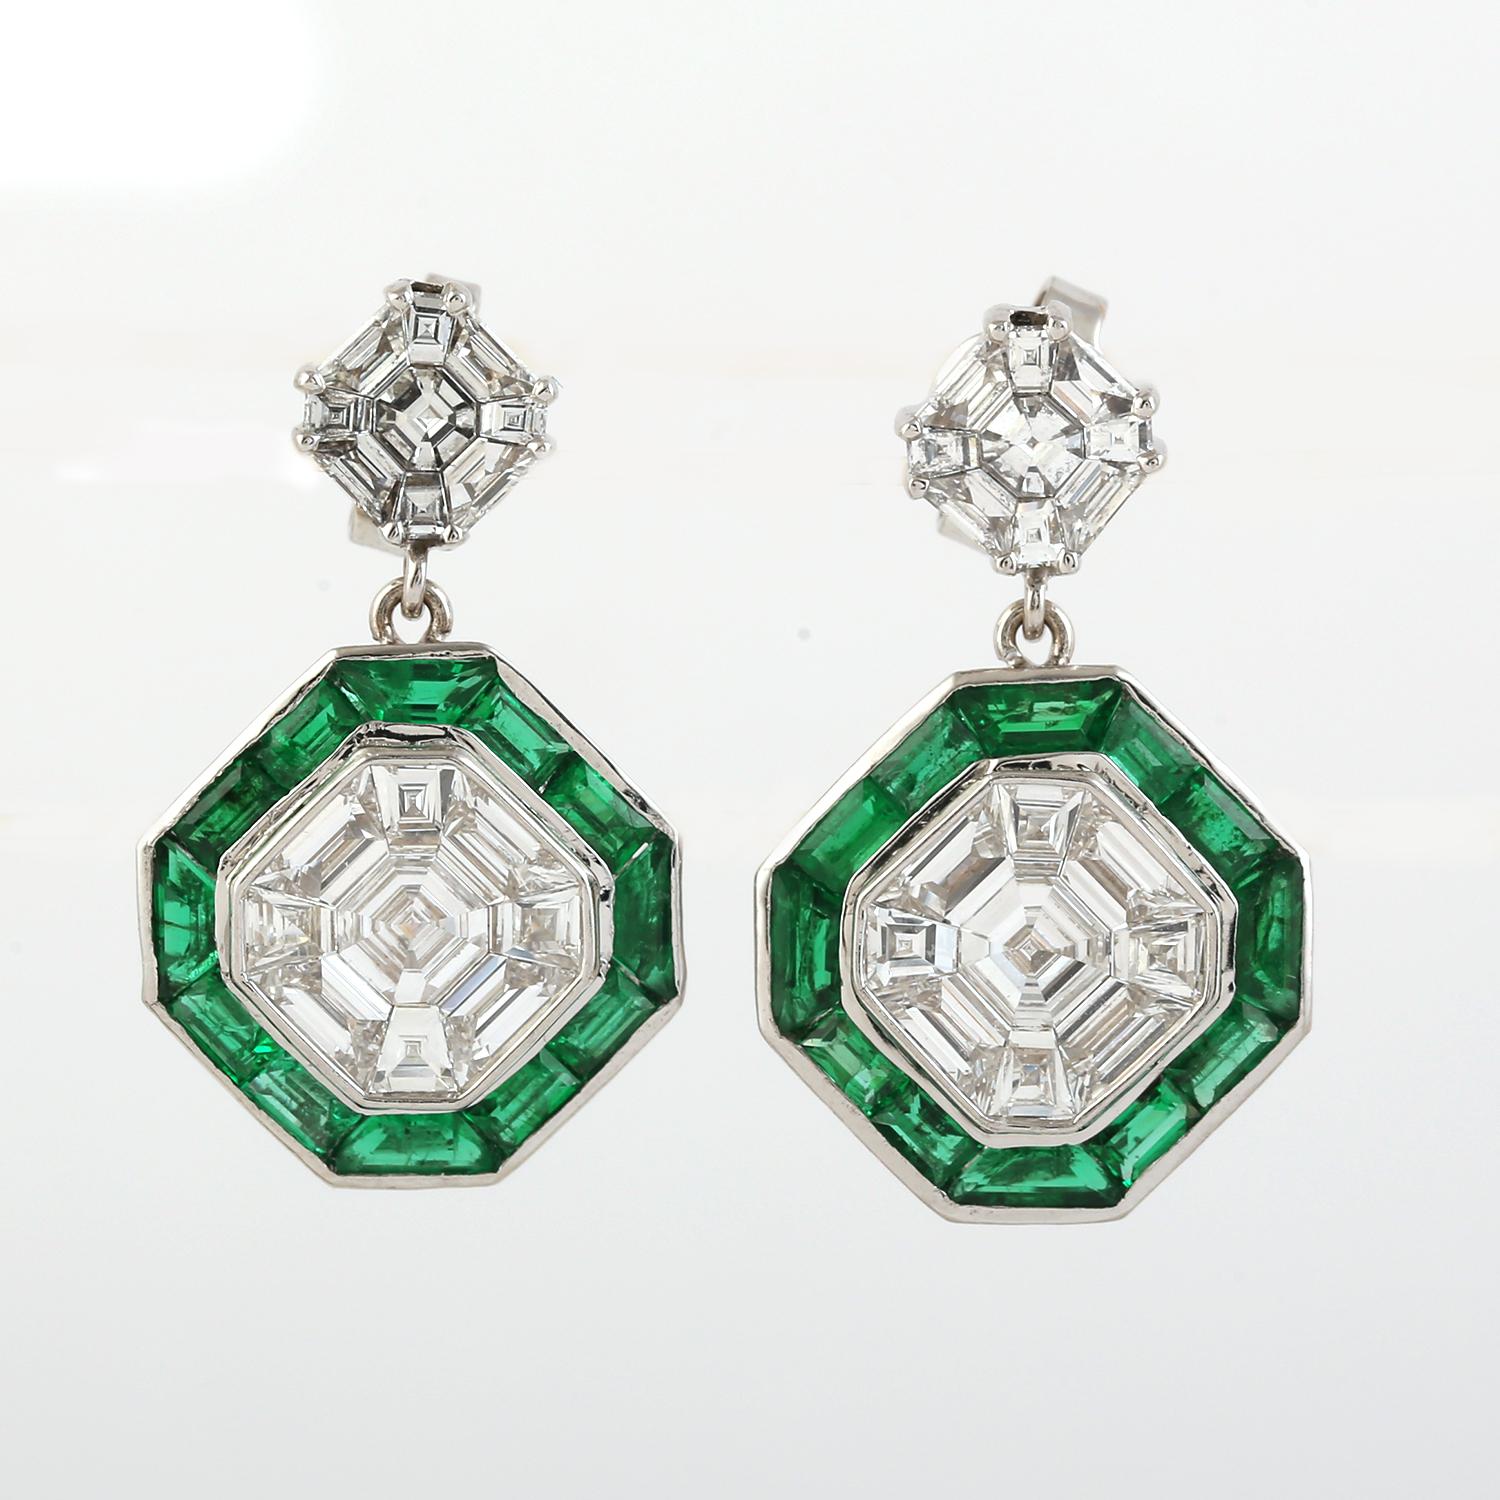 Sweet and Sassy this Art Deco Style Diamond and Emerald Earring is super elegant and charming and is set in 18K White Gold.

Closure: Push Post

18KT: 5.253gms
Diamond: 2.28cts
Emerald: 2.65cts